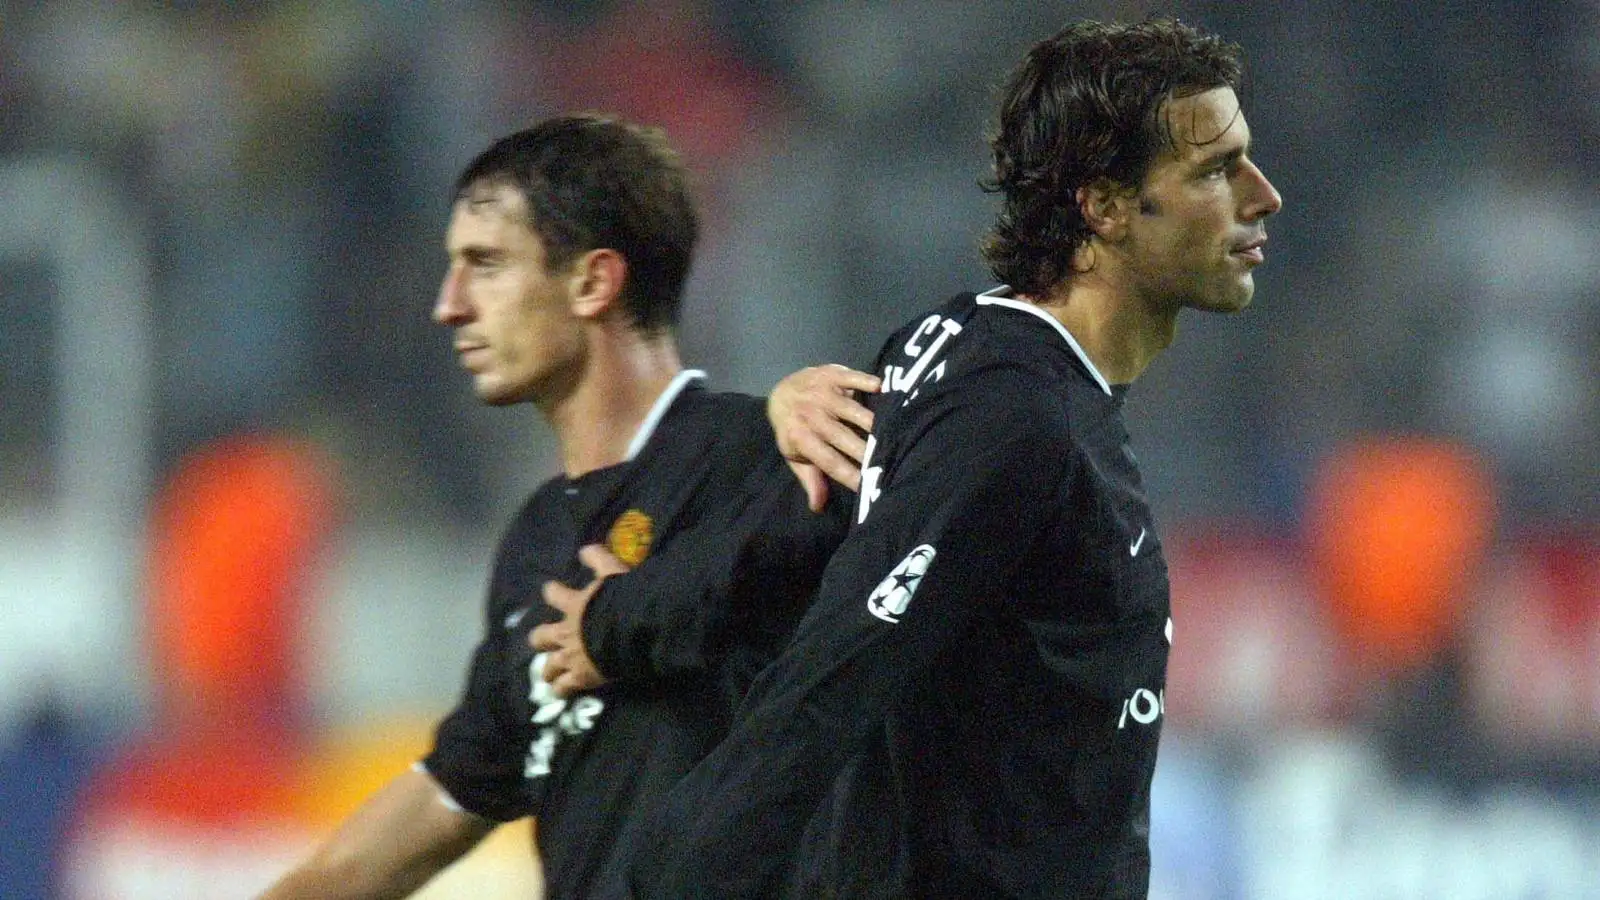 Neville says Van Nistelrooy was 'the only player to try and punch me' as  Man Utd legends finally agree after bust-up